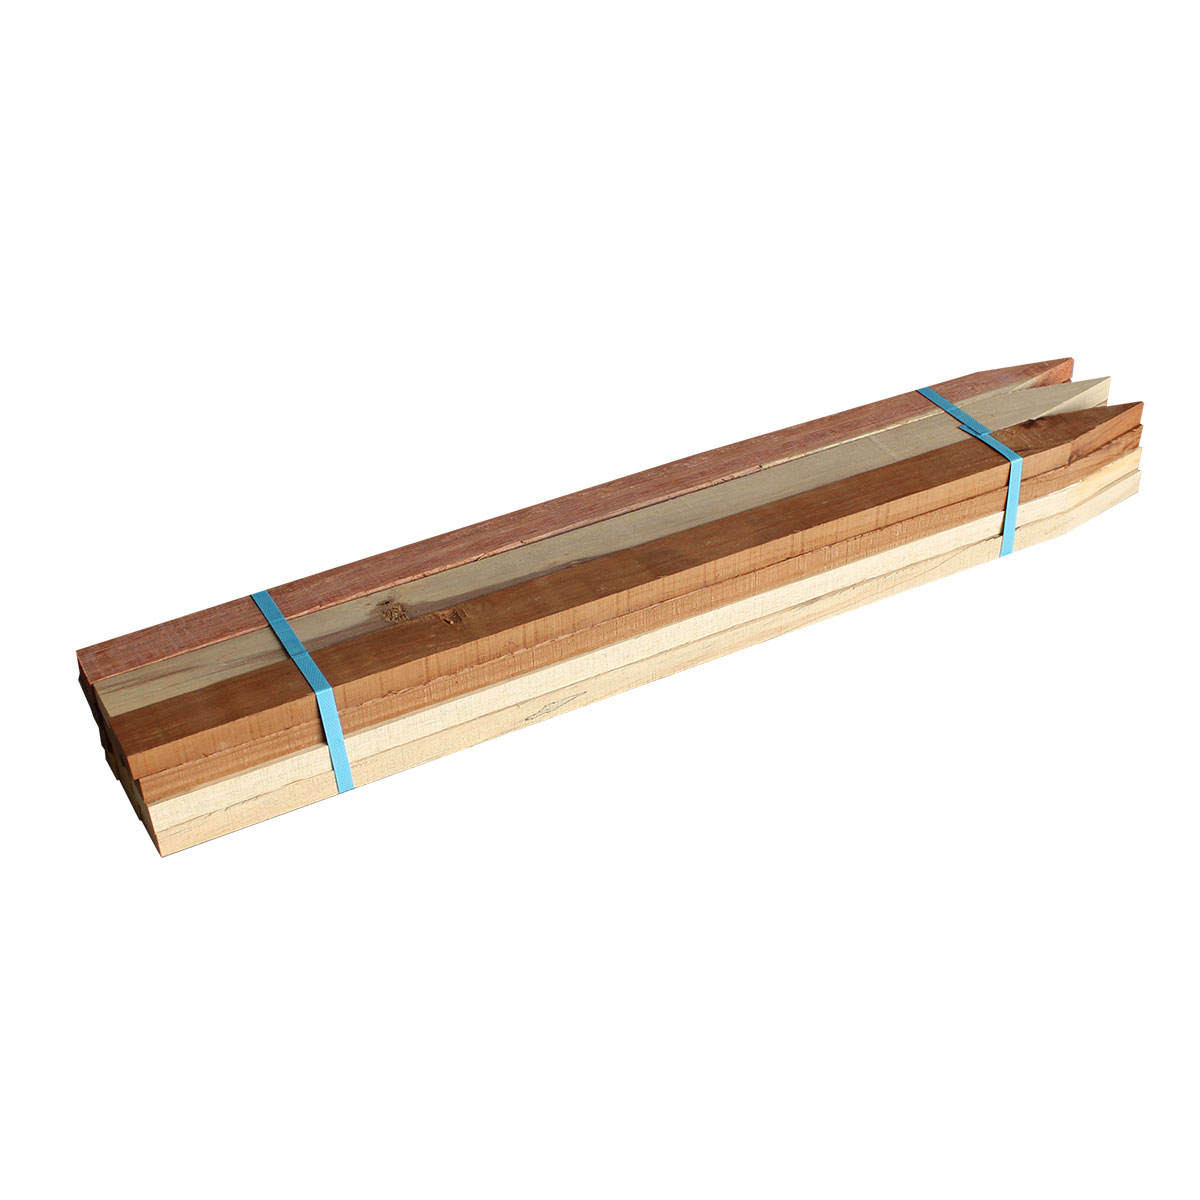 Hardwood Stakes 50 x 25 x 900mm - 12 Pack